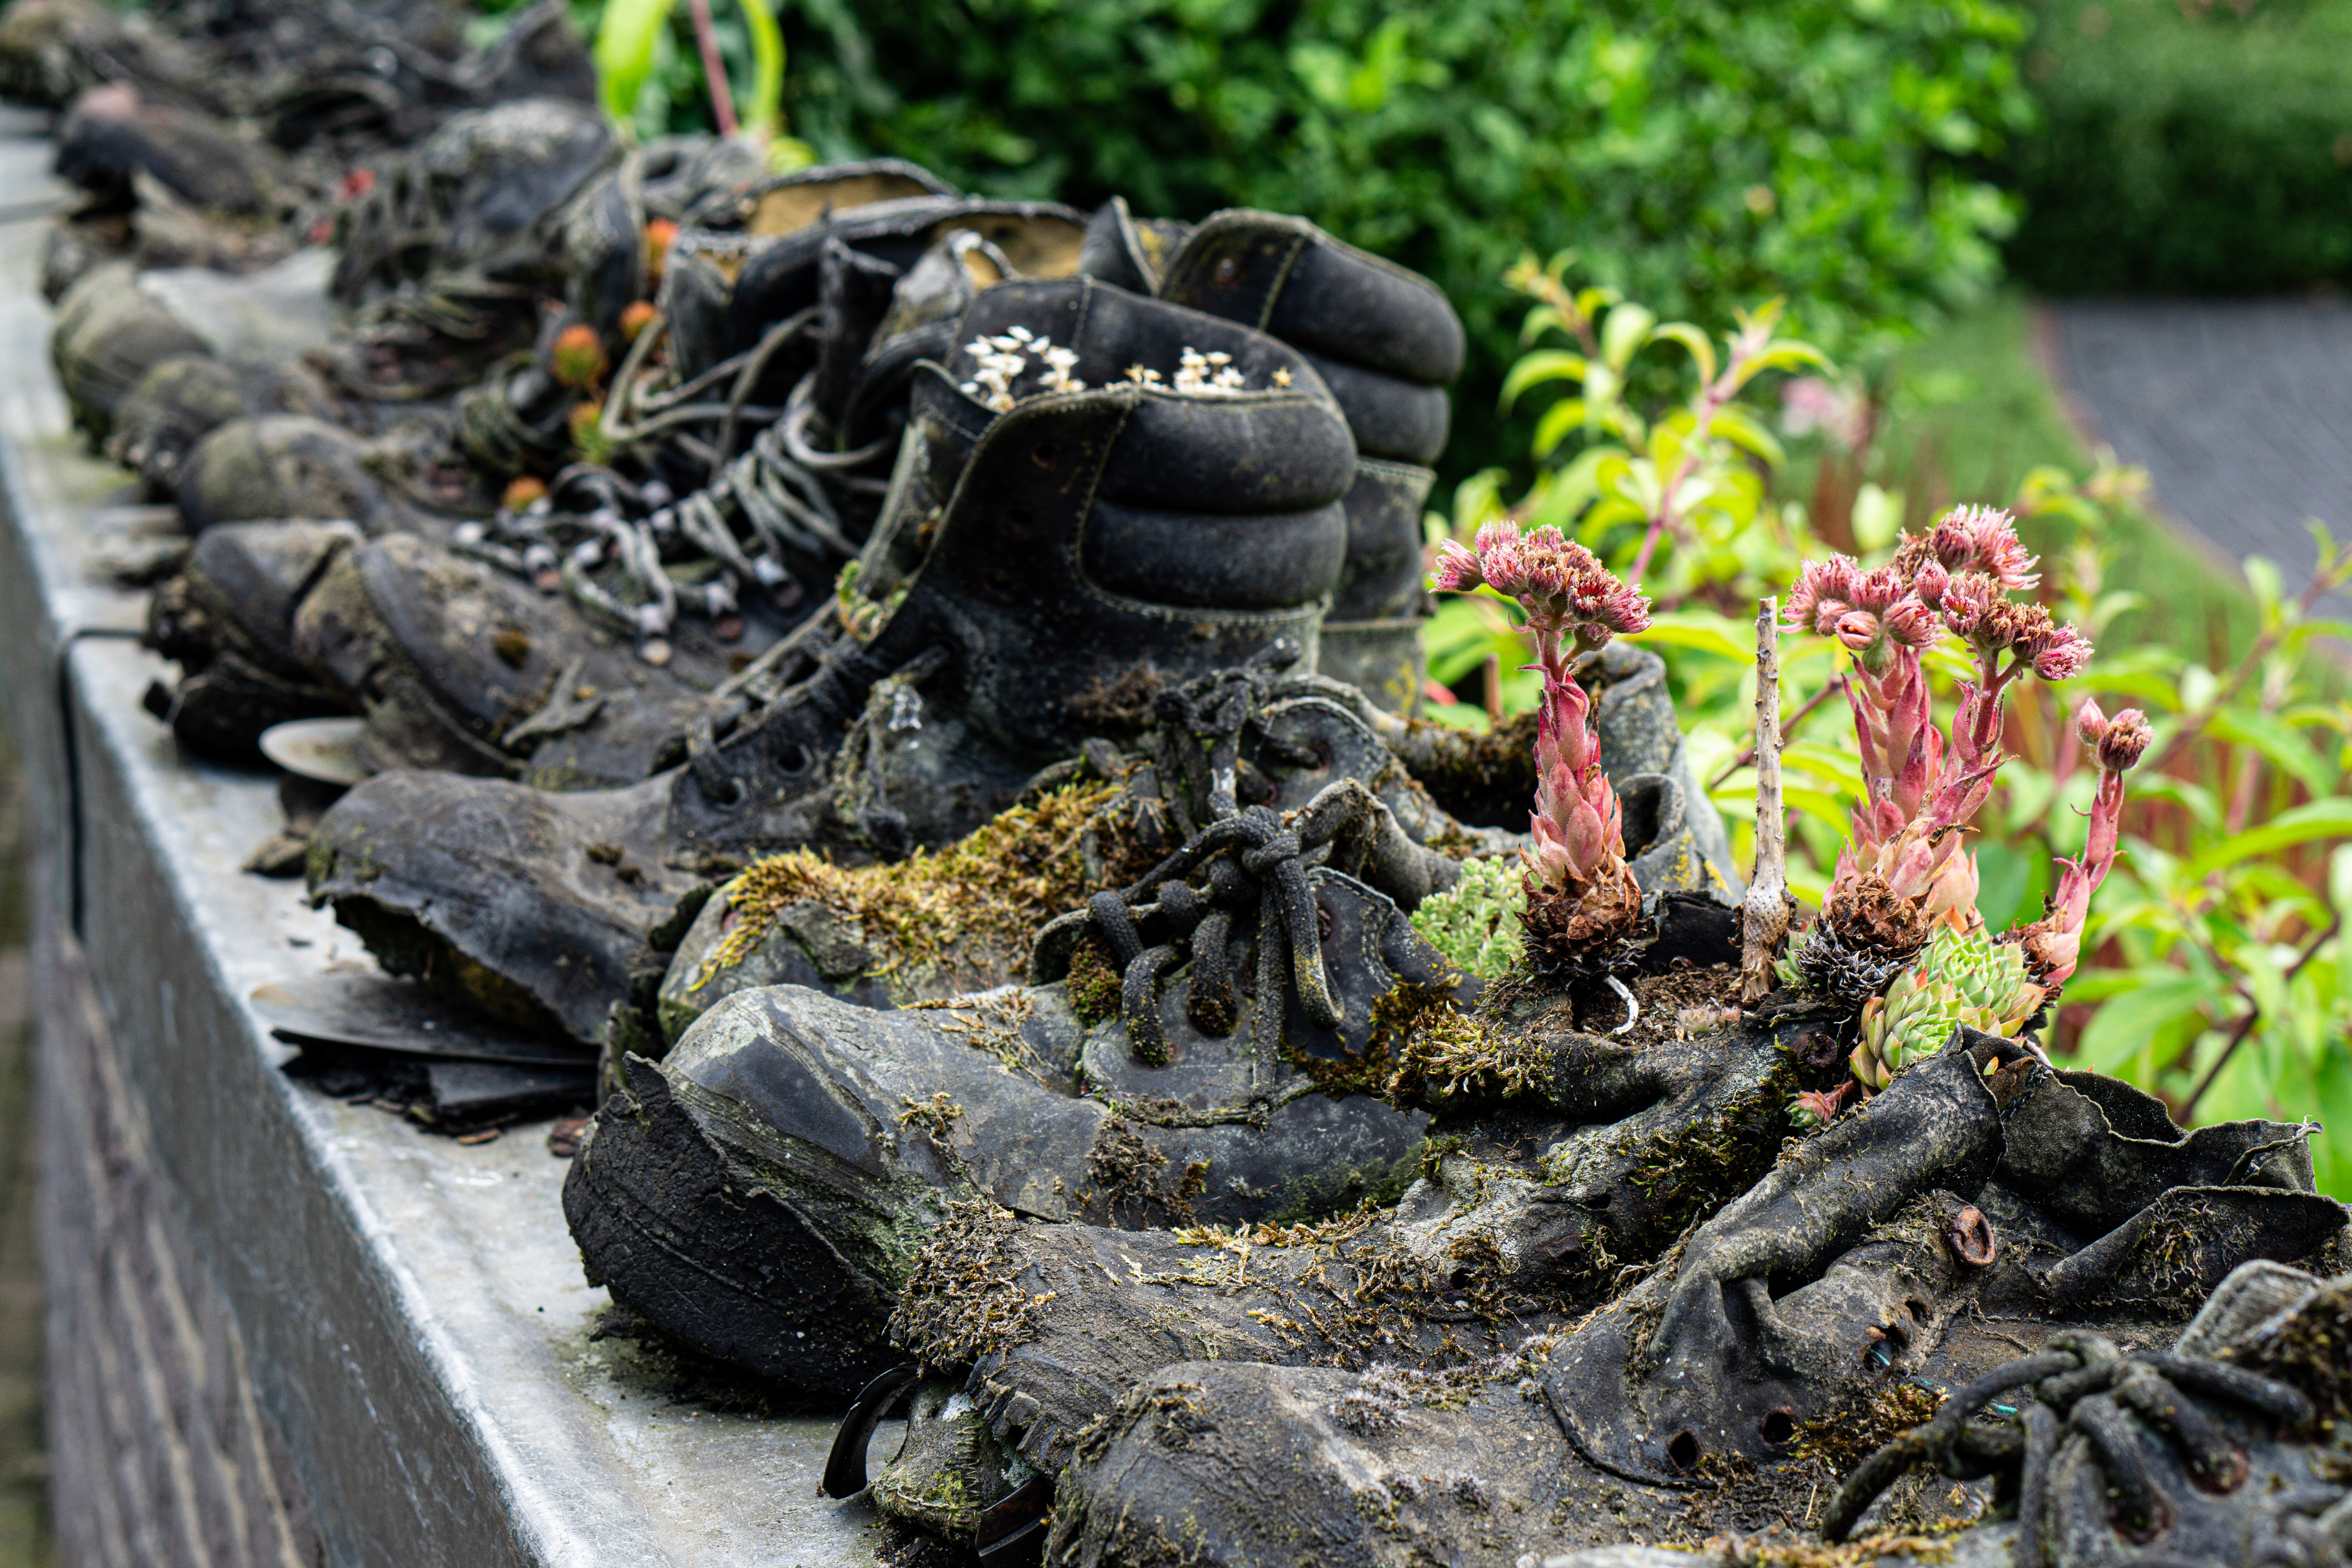 Old shoes used as plantpots